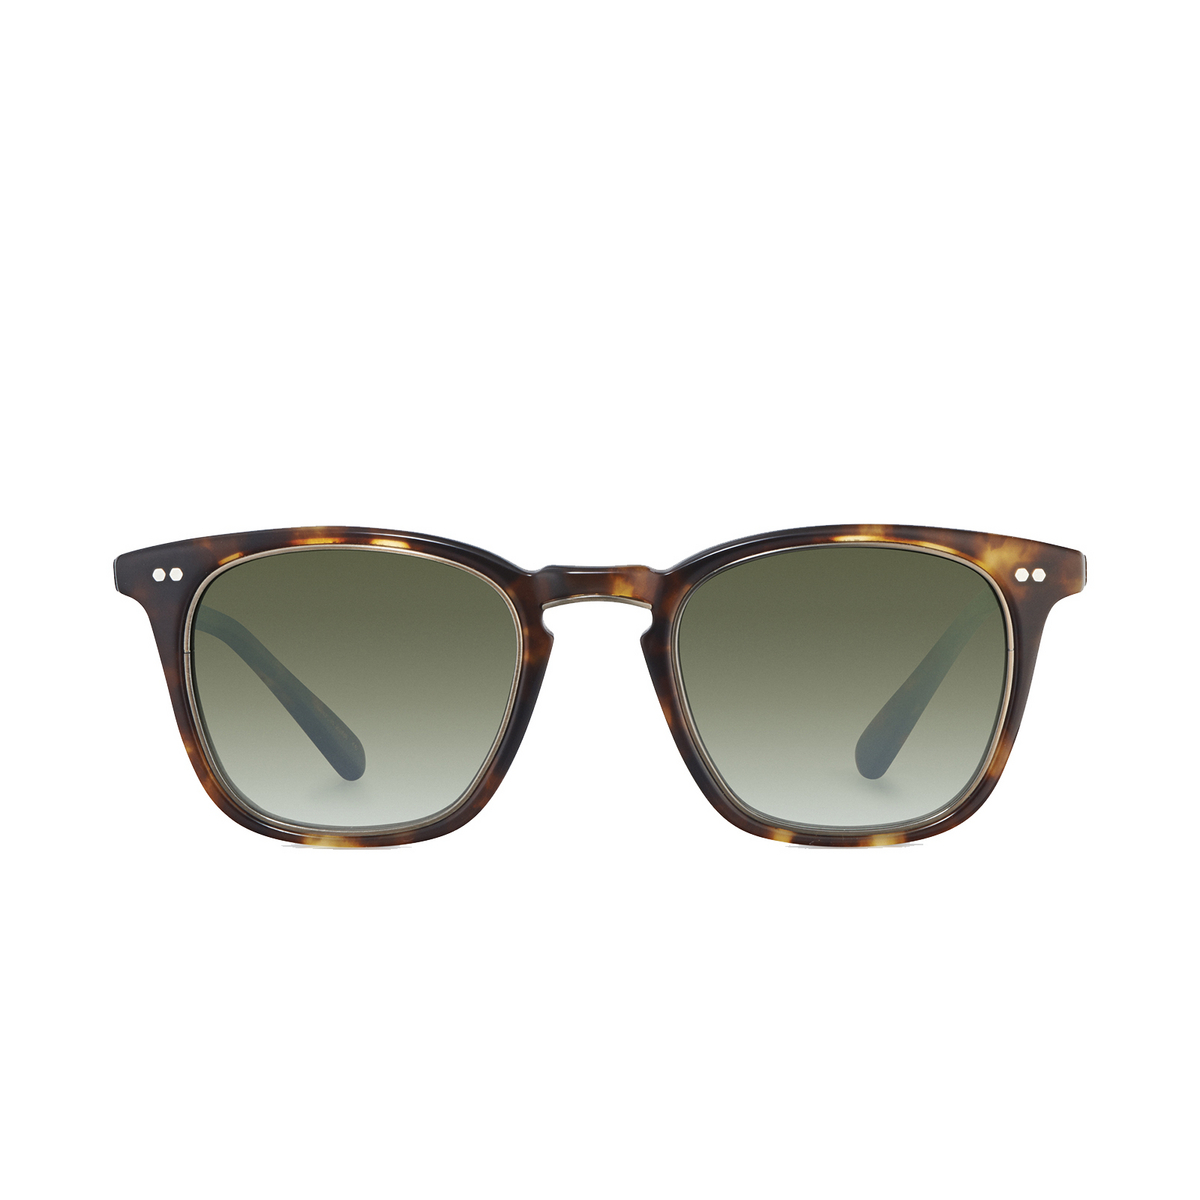 Mr. Leight GETTY S Sunglasses MPL-ATG/PLM - front view